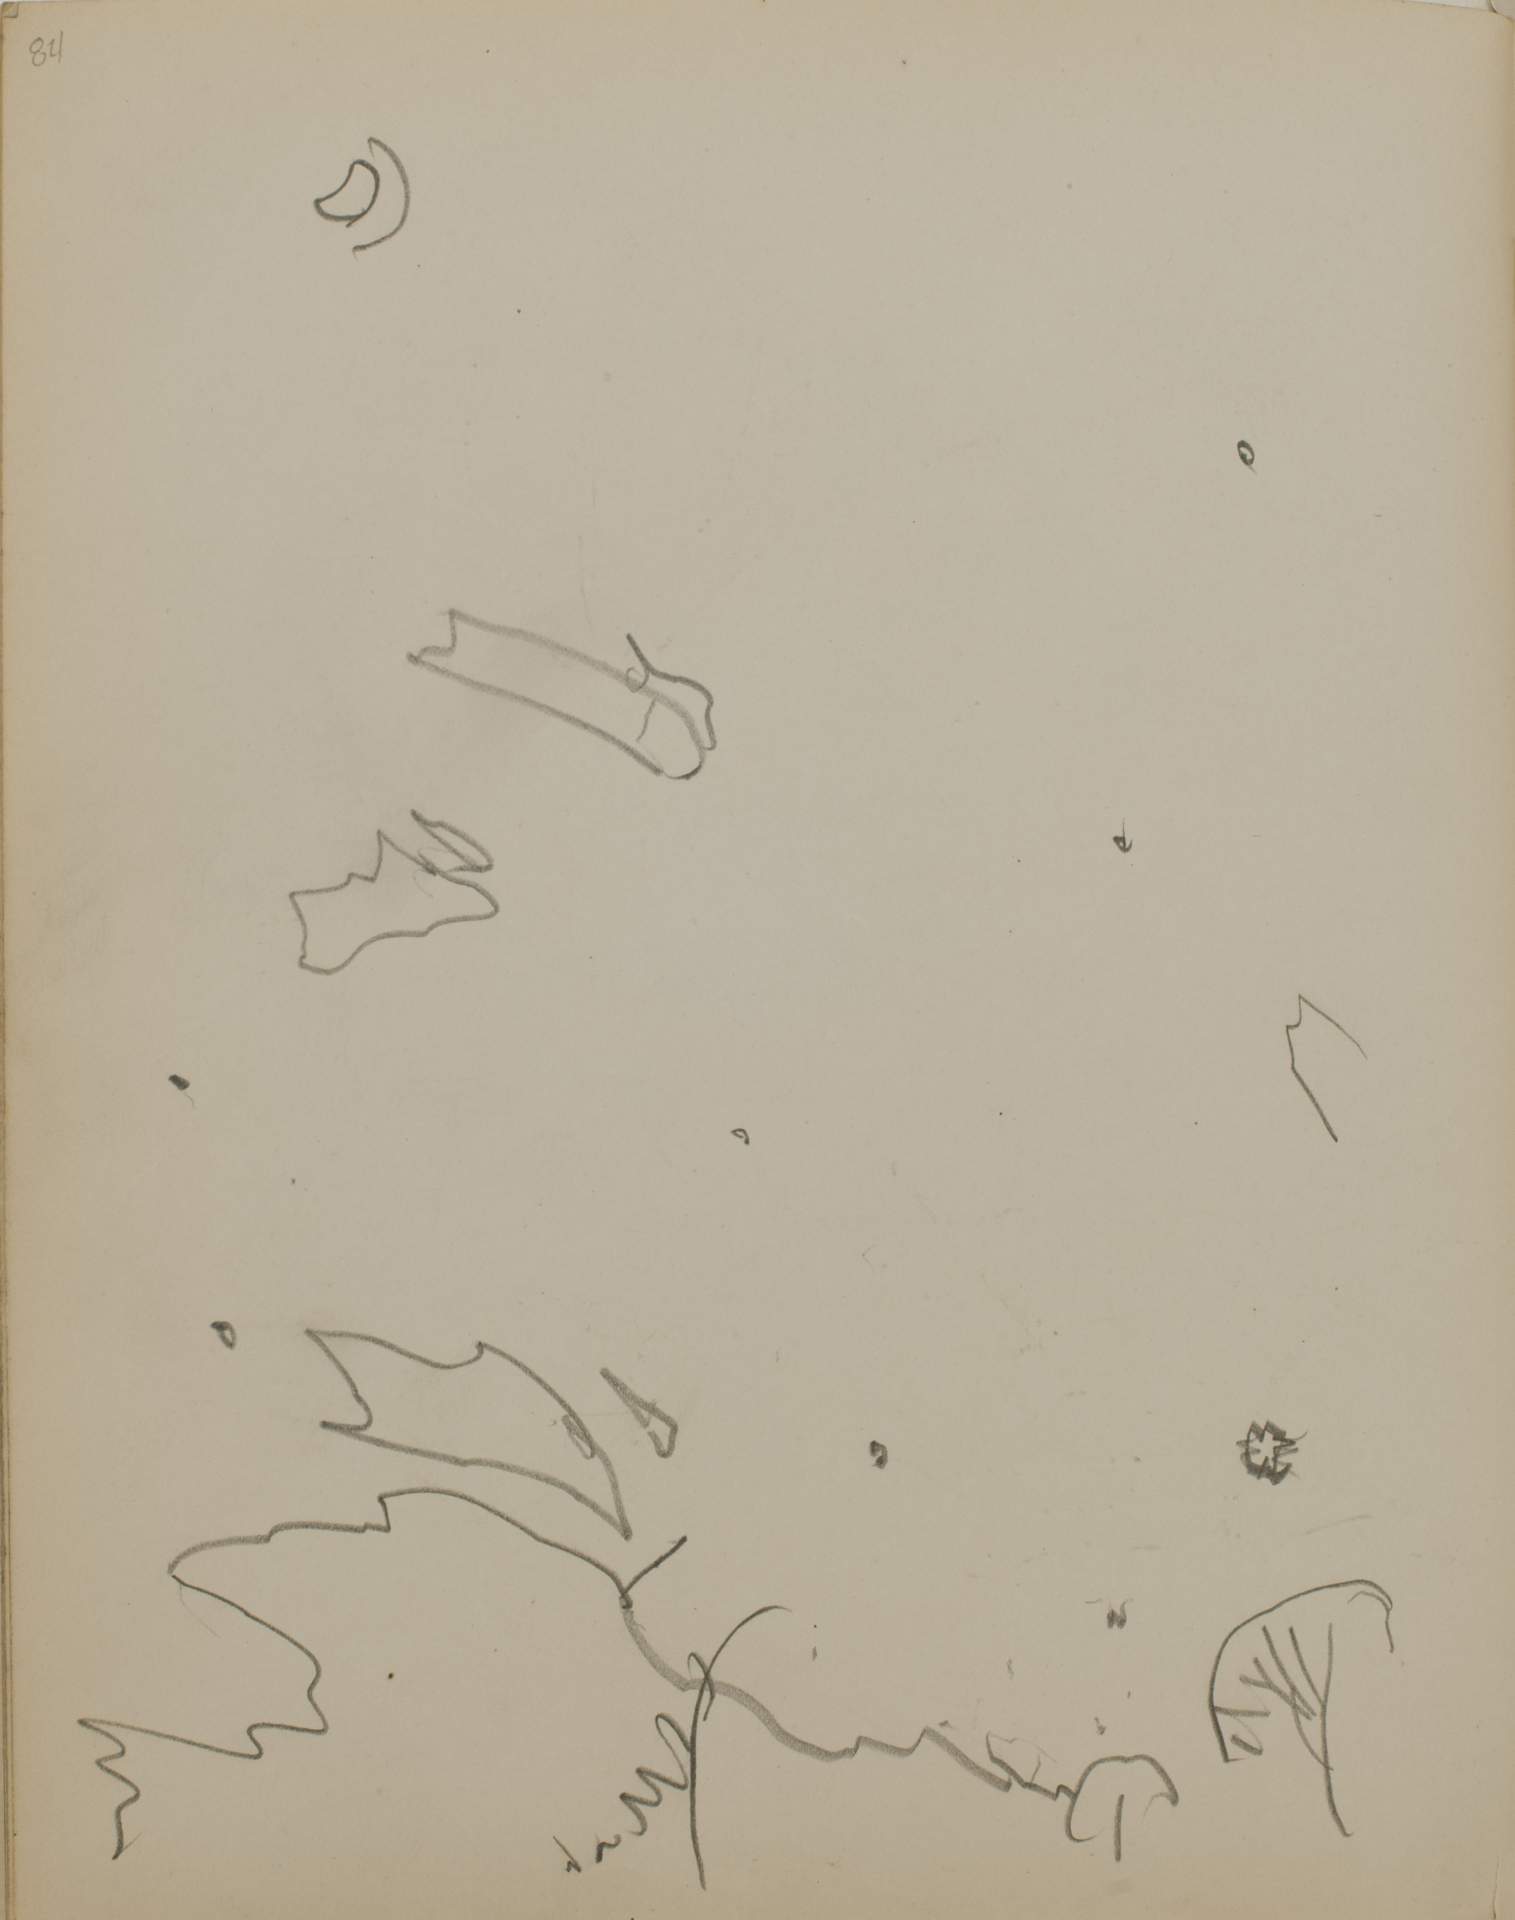 Untitled (sketch of trees and night sky)